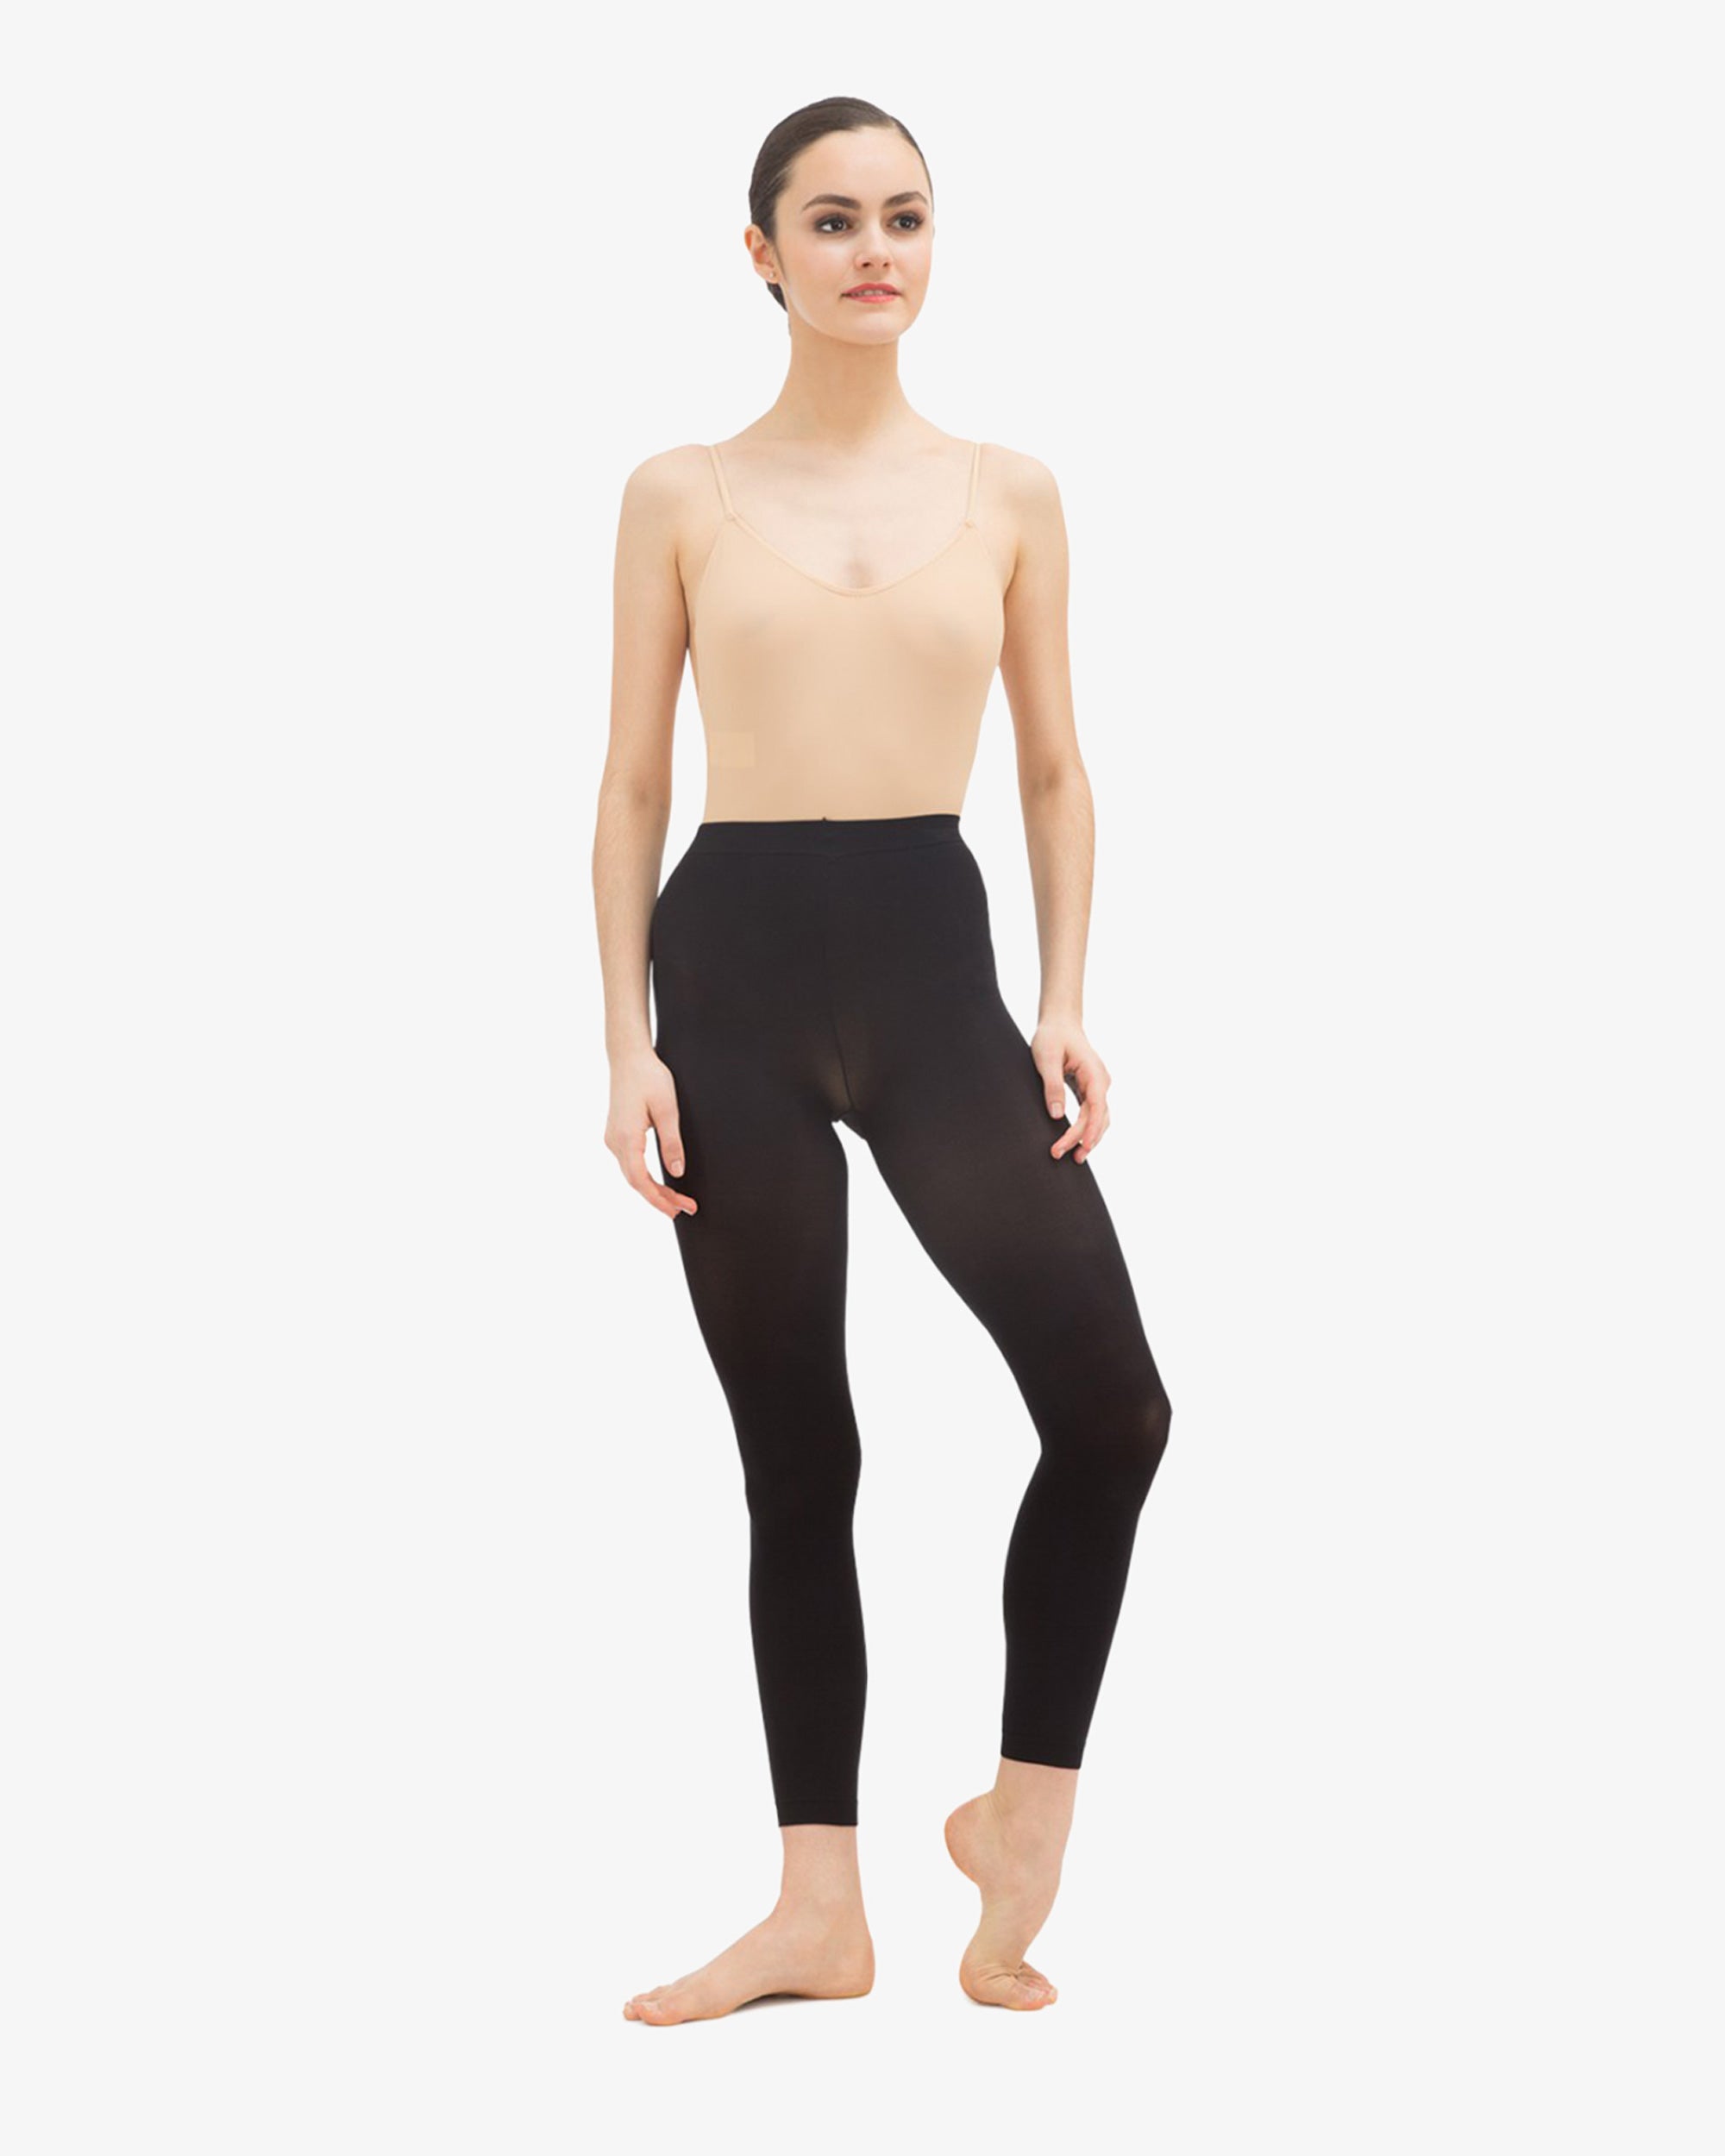 Repetto Paris, Footless dance tights